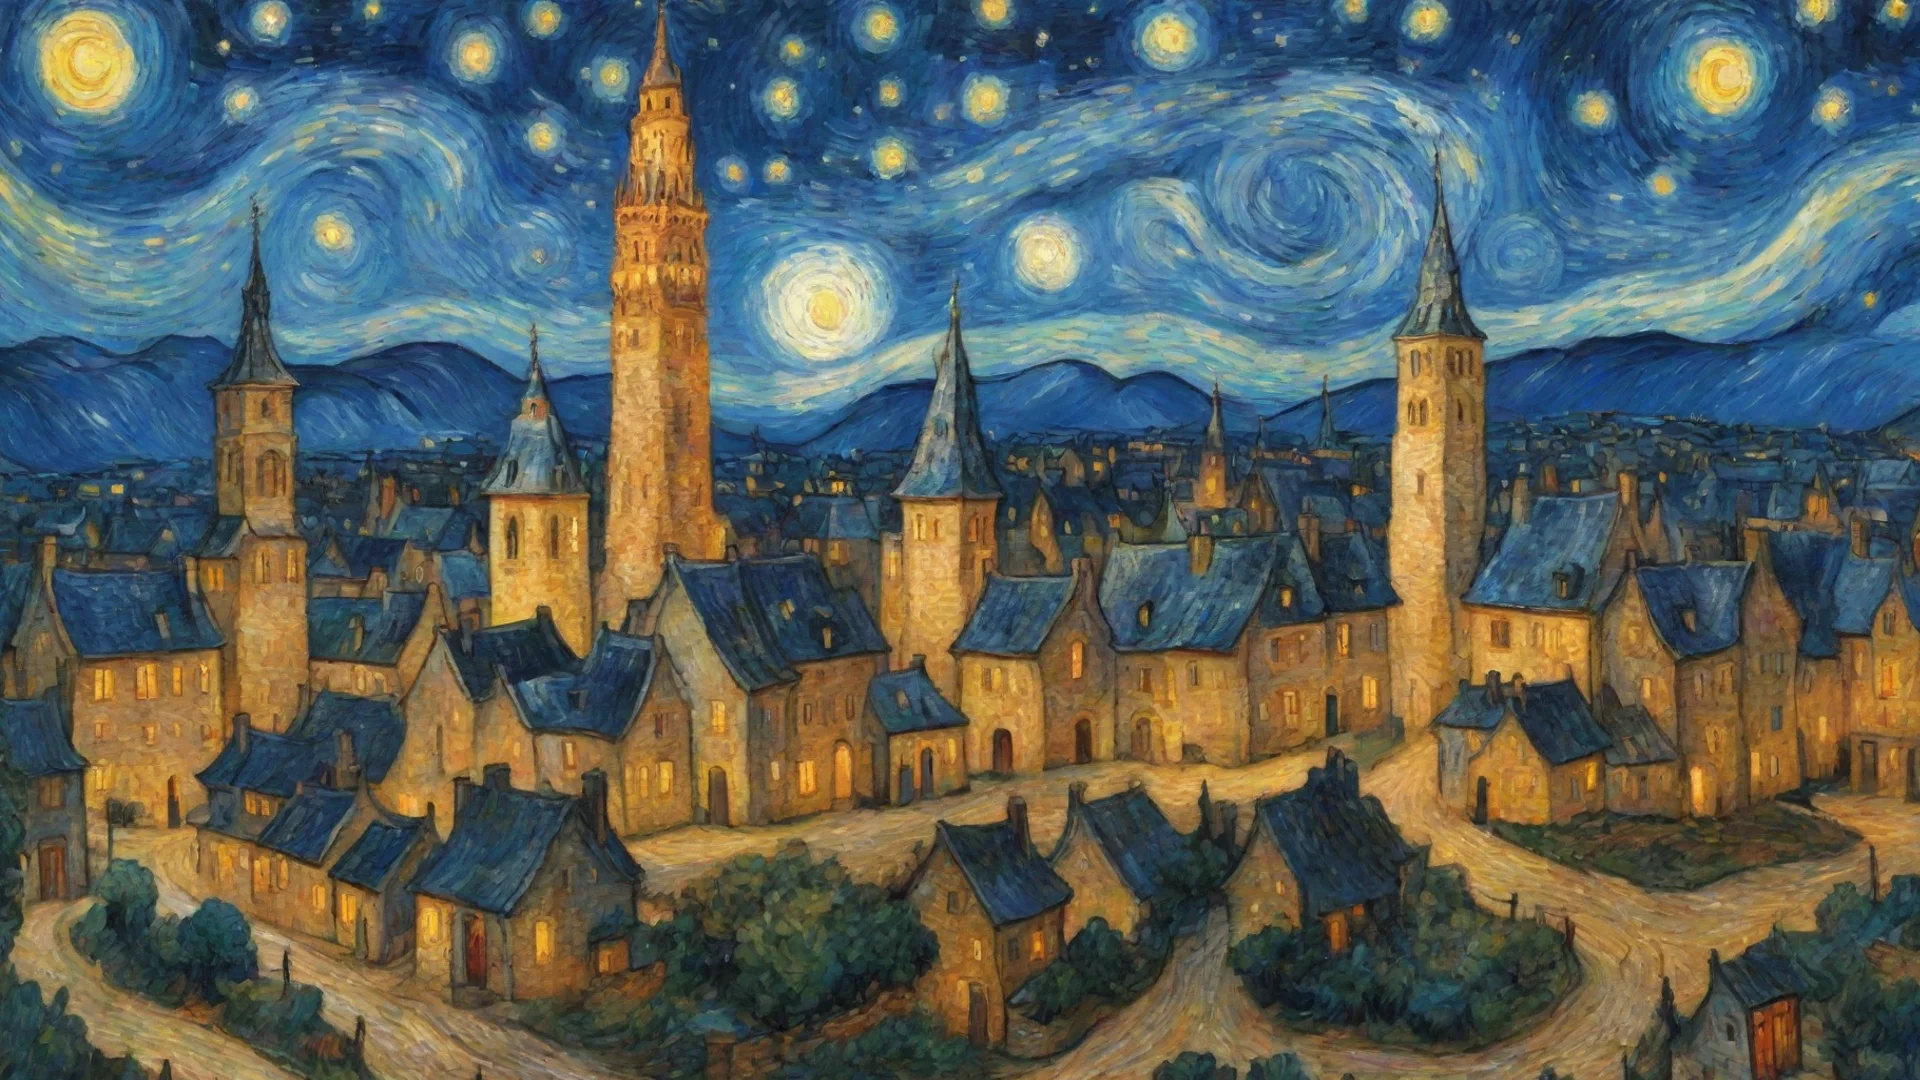 artistic van gogh village at night starry spiraling towers amazing hd aesthetic wide